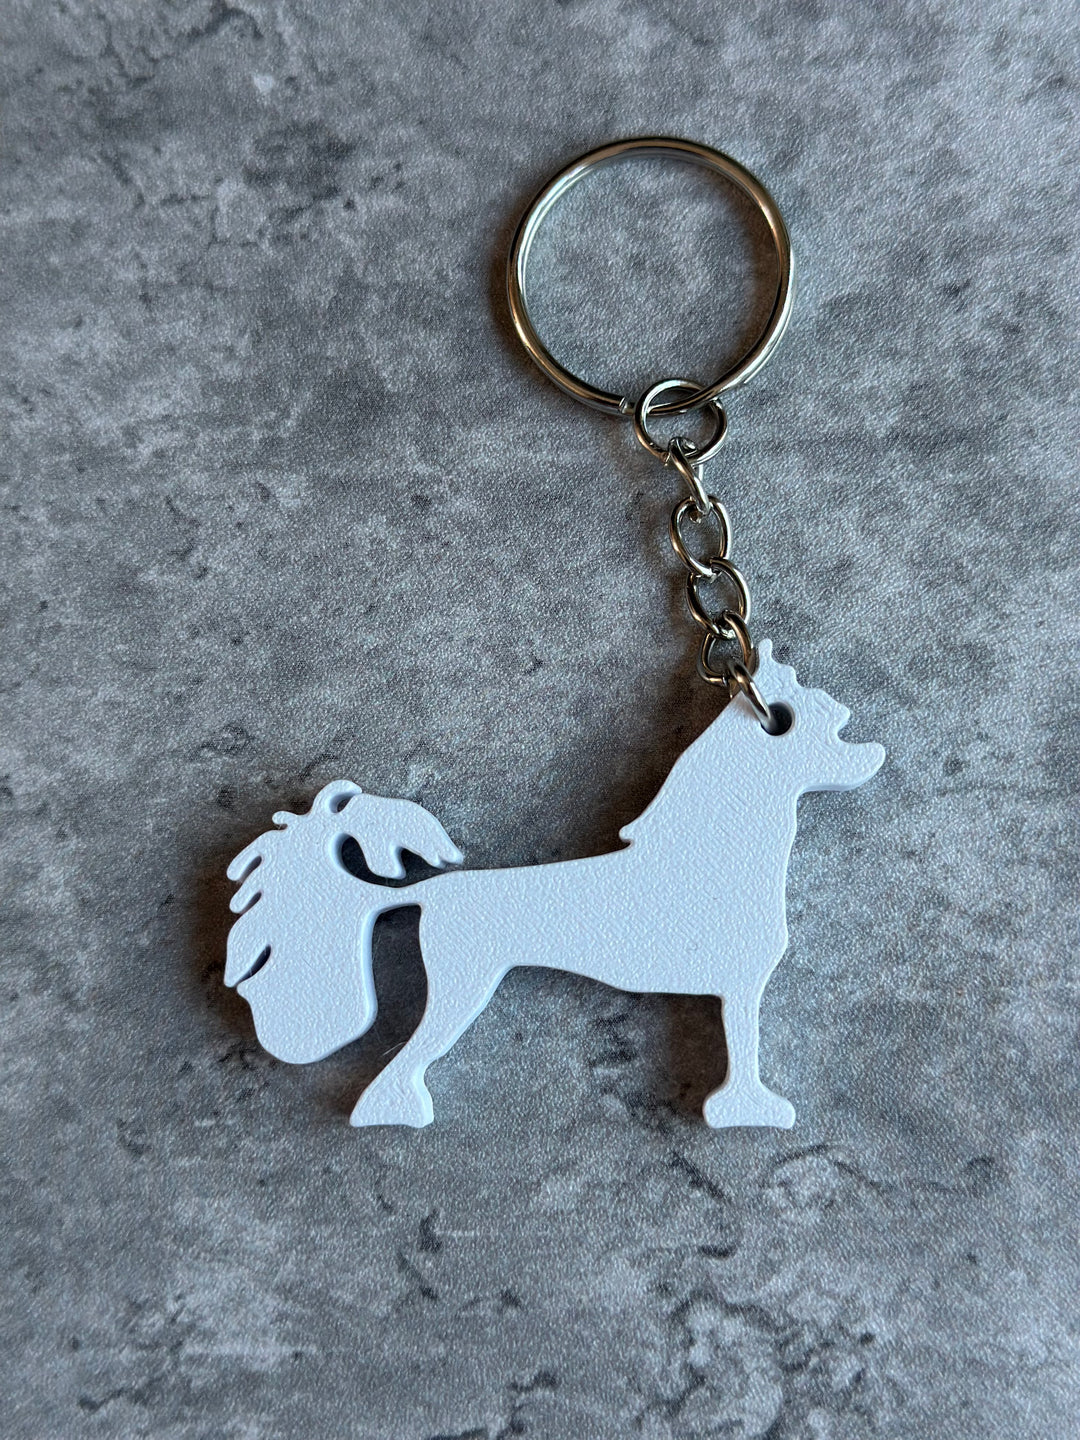 Chinese Crested Dog Keyring Stl File | 3D Printed | Unique Personalised Gifts